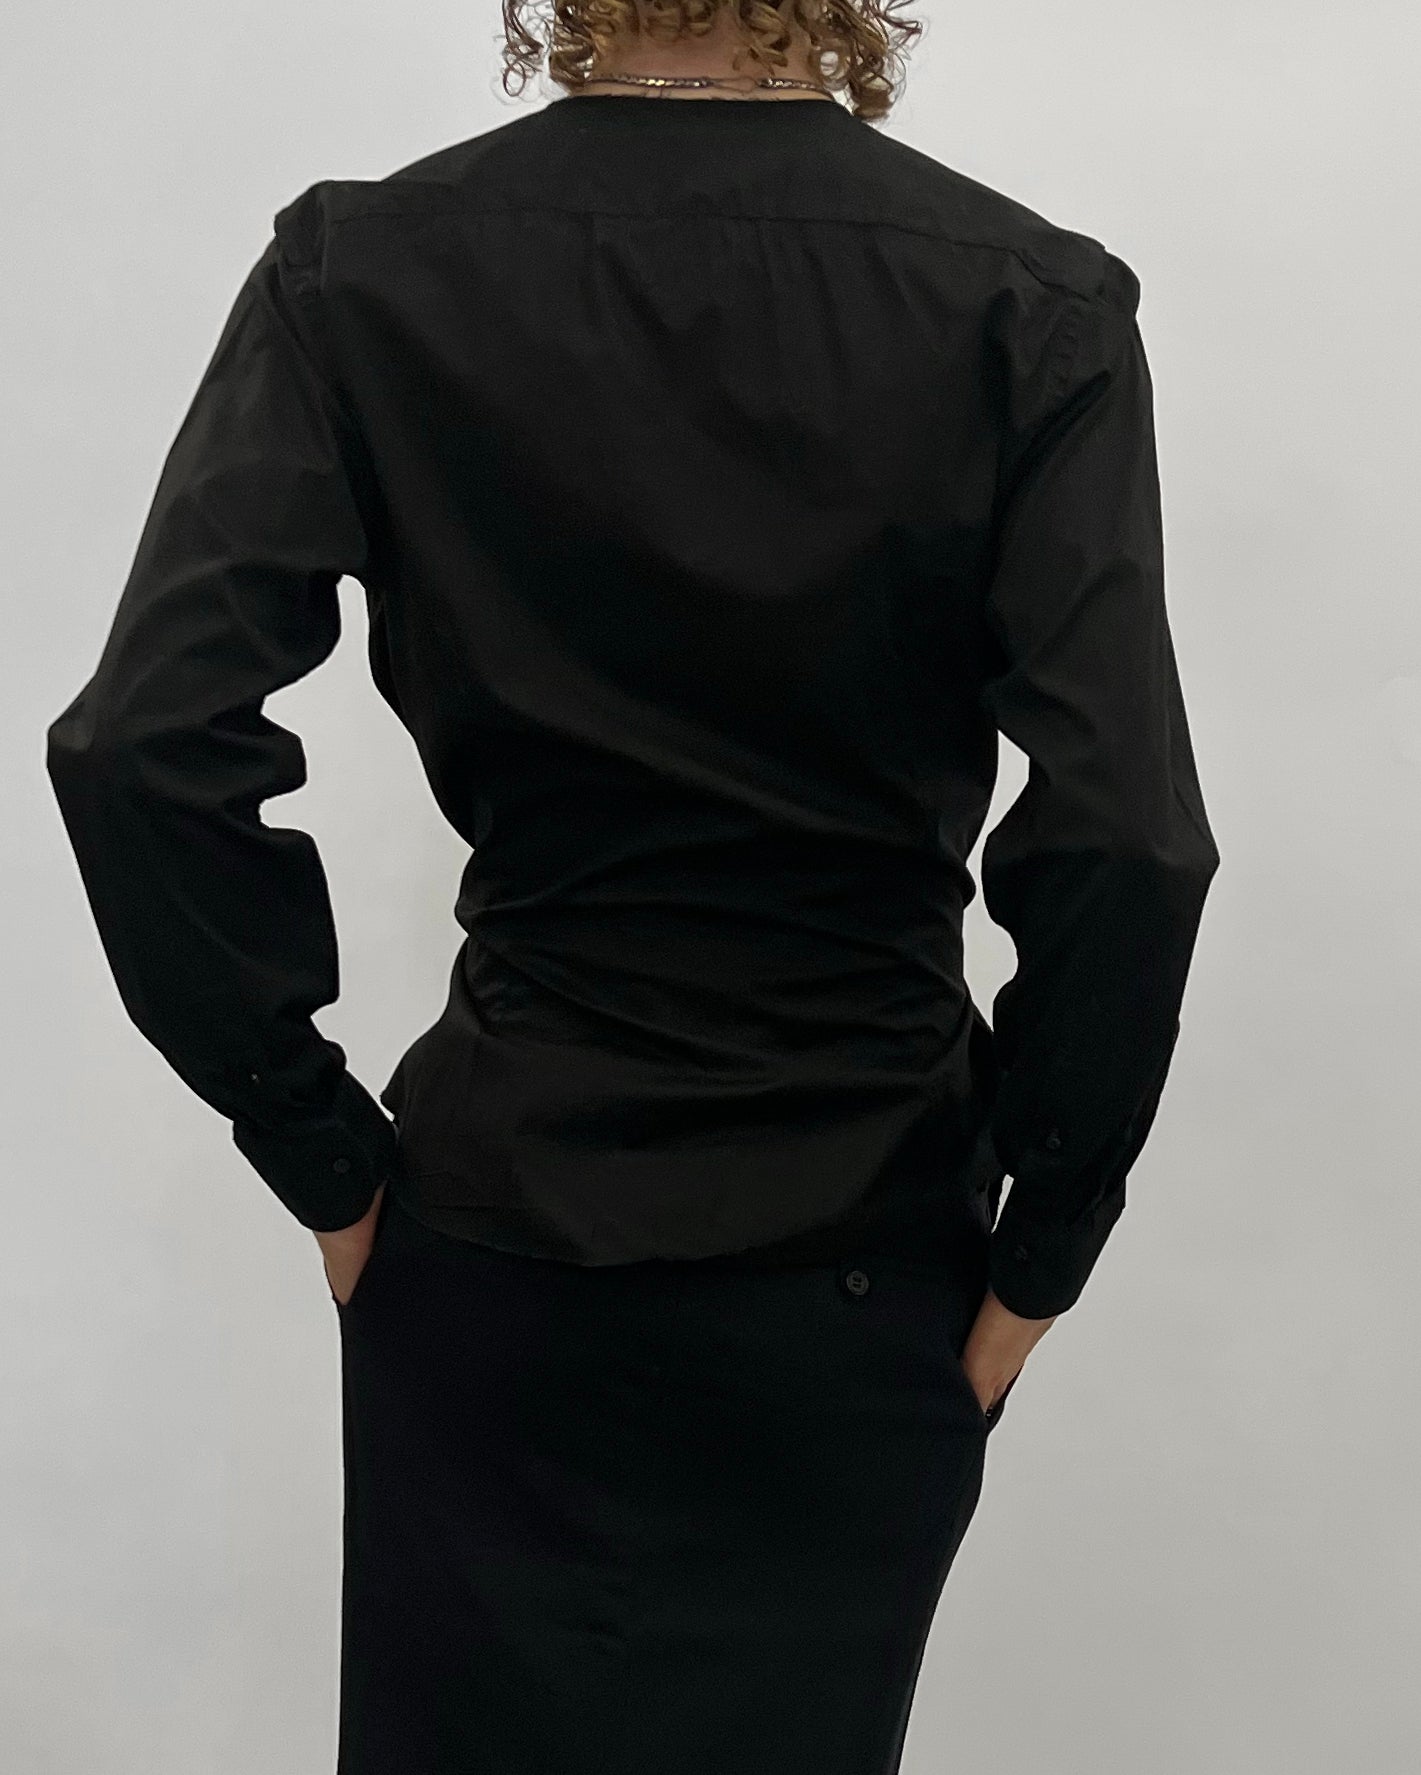 Long sleeve shirt with audelà logo on a string in waist.